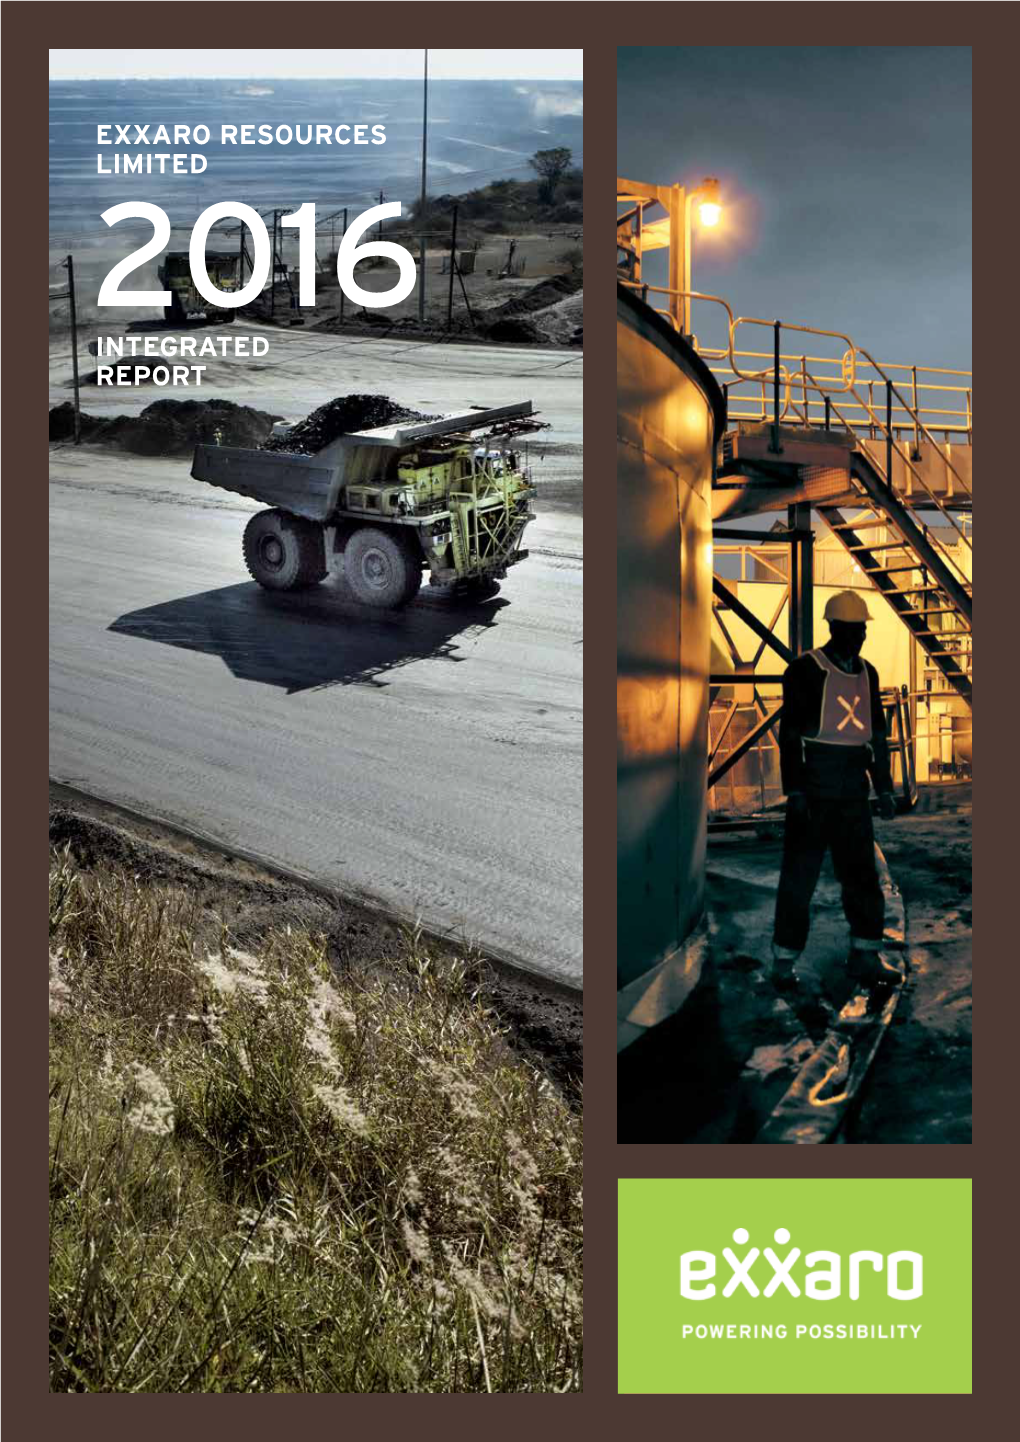 Exxaro Resources Limited 2016 Integrated Report Exxaro Resources Limited 2016 Integrated Report About This Report Board Responsibility